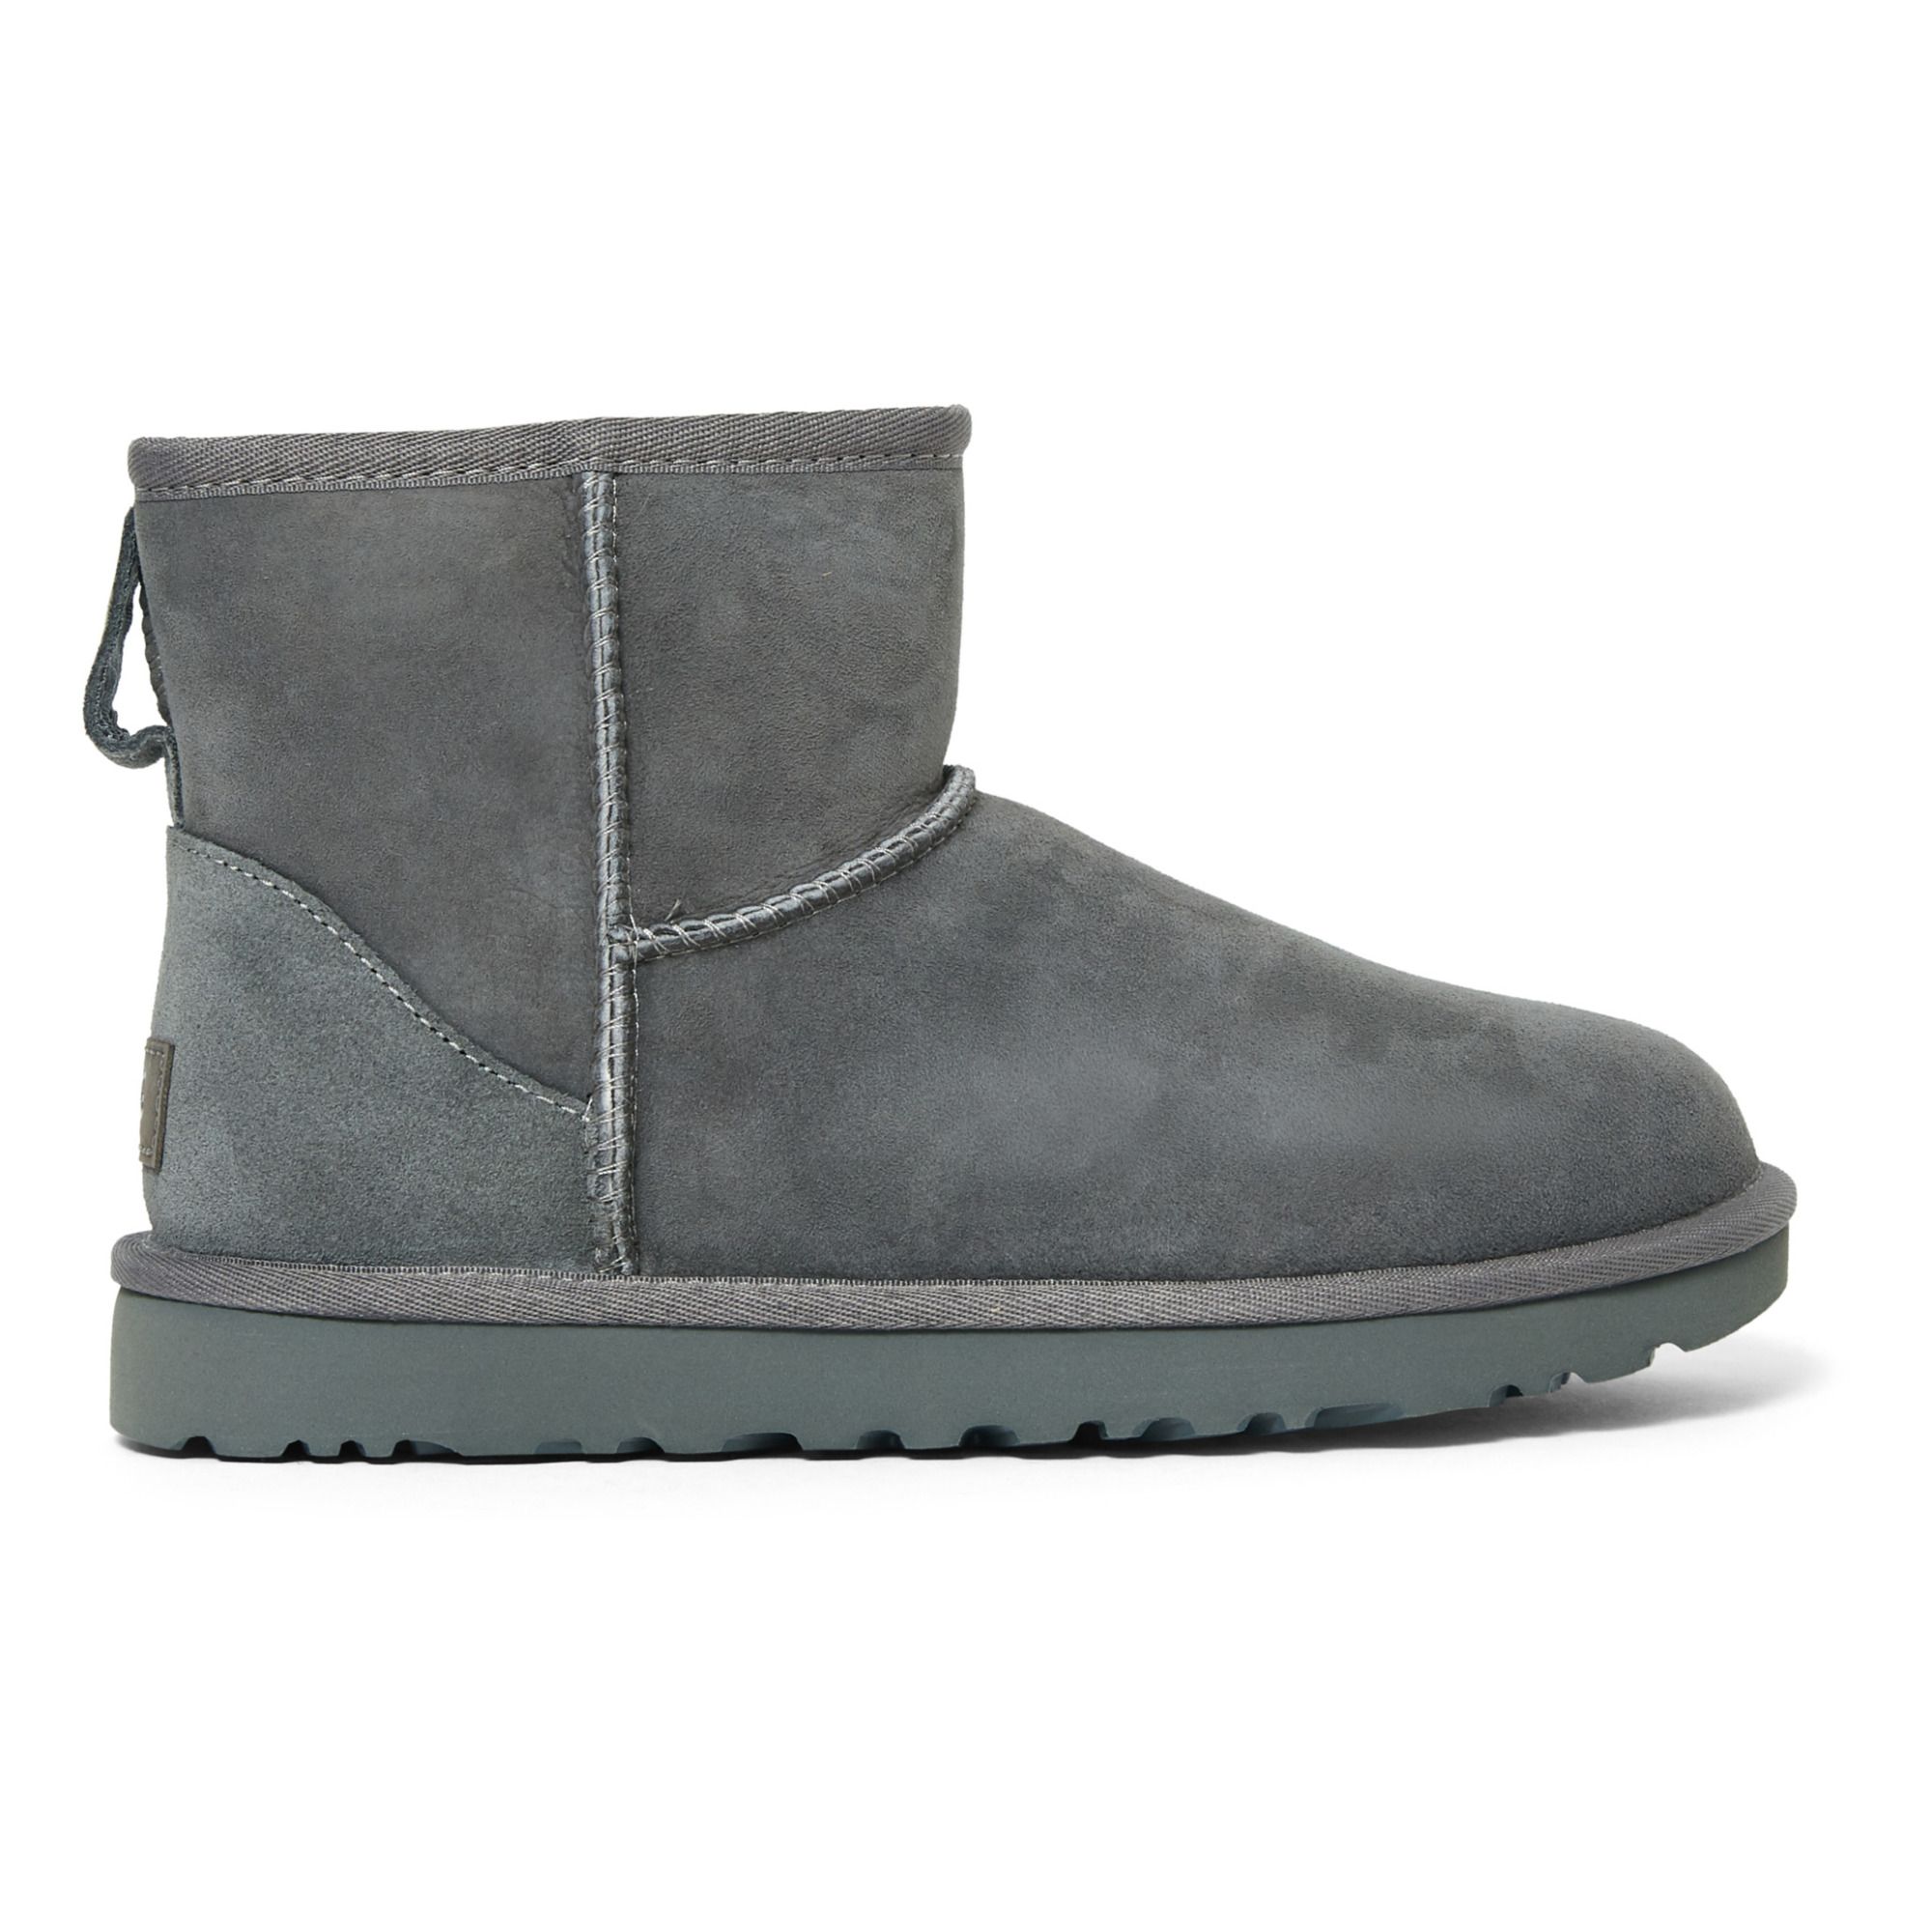 Ugg - Boots Classic Mini II - Collection Femme - Gris